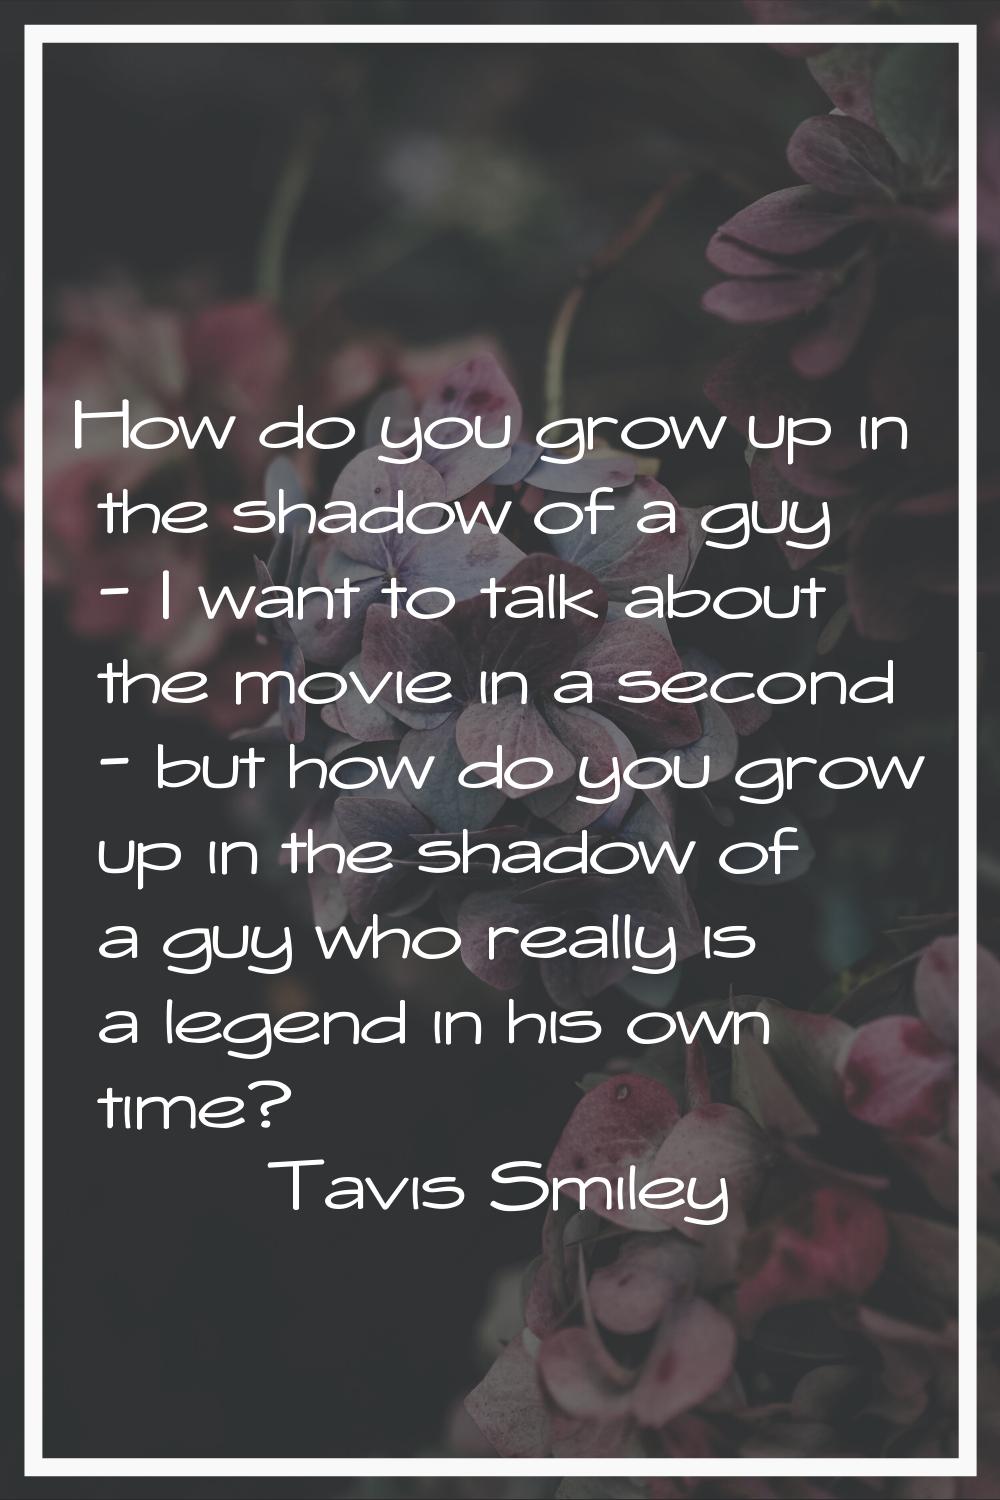 How do you grow up in the shadow of a guy - I want to talk about the movie in a second - but how do